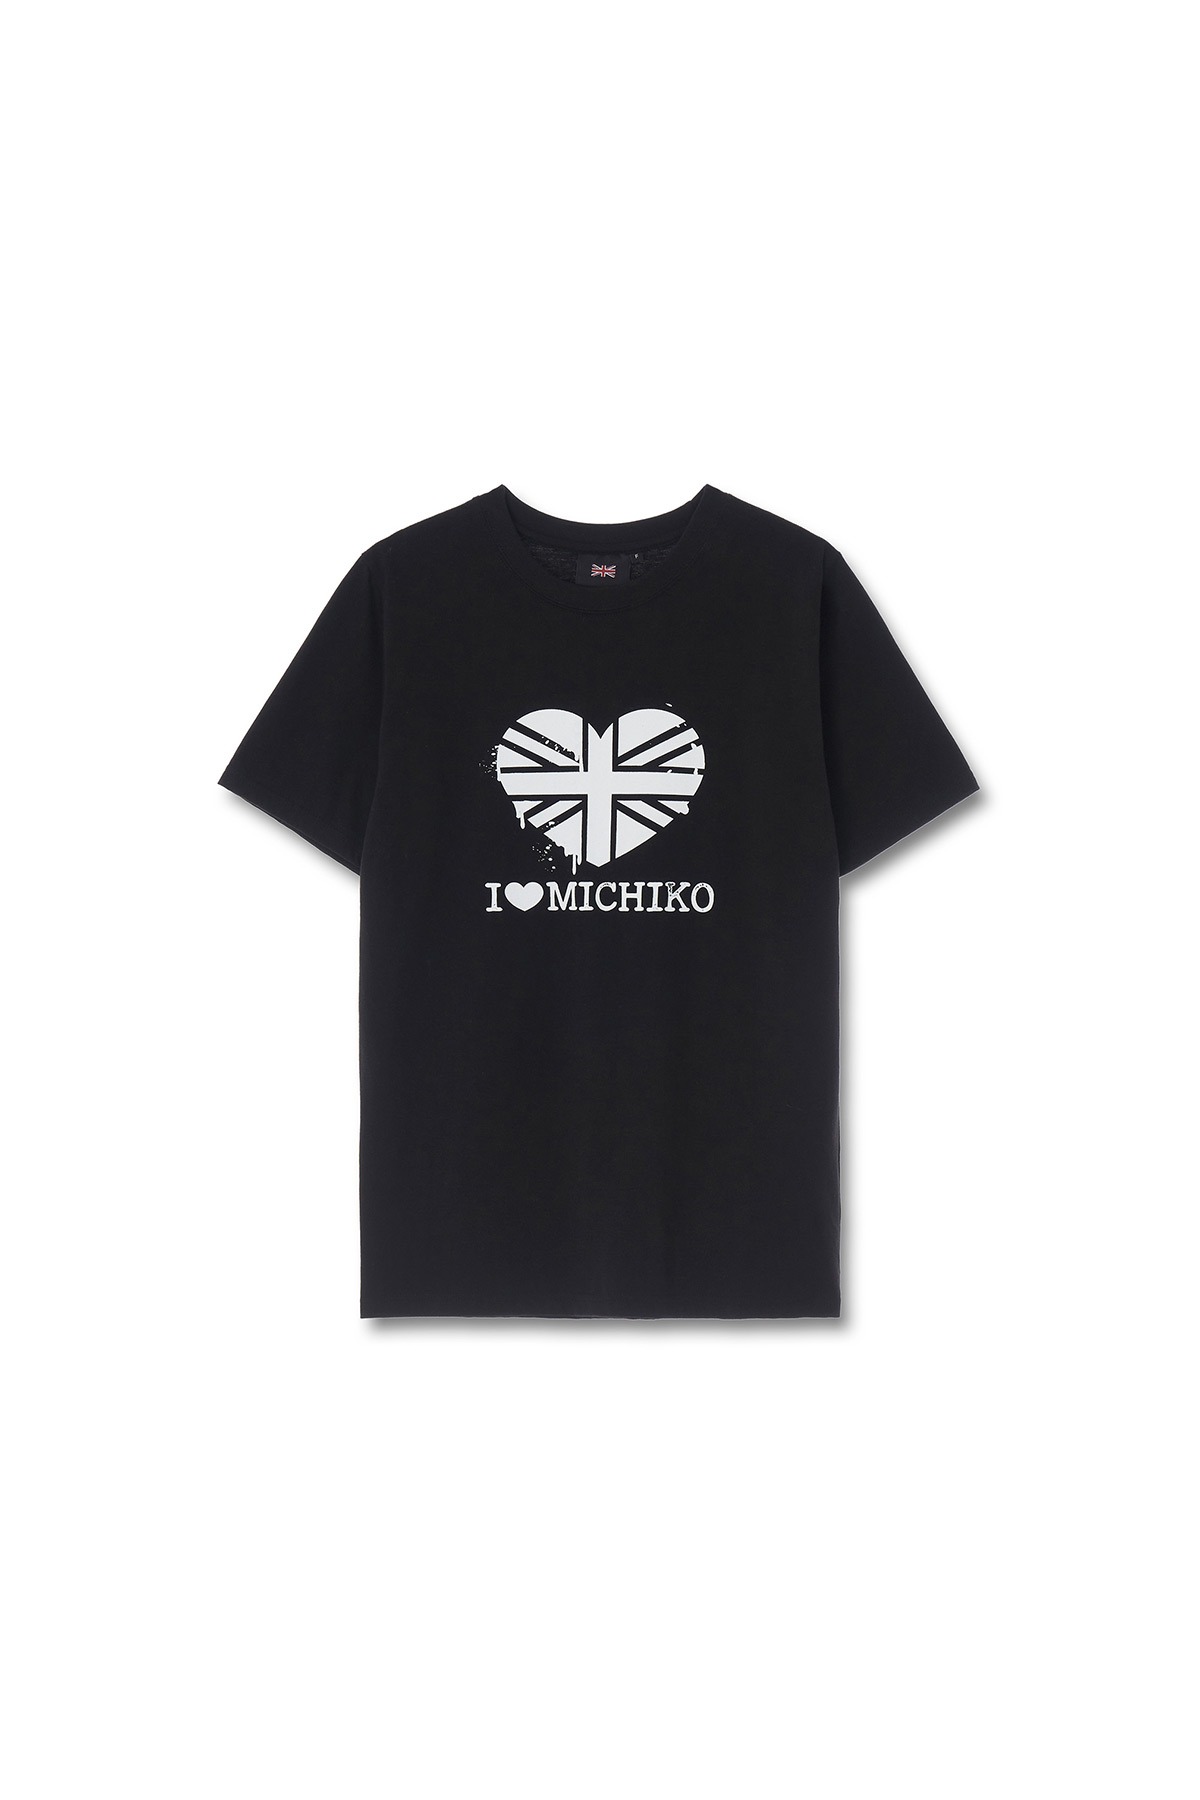 MELTING UNION JACK TOP BLACK_RELAXED FIT